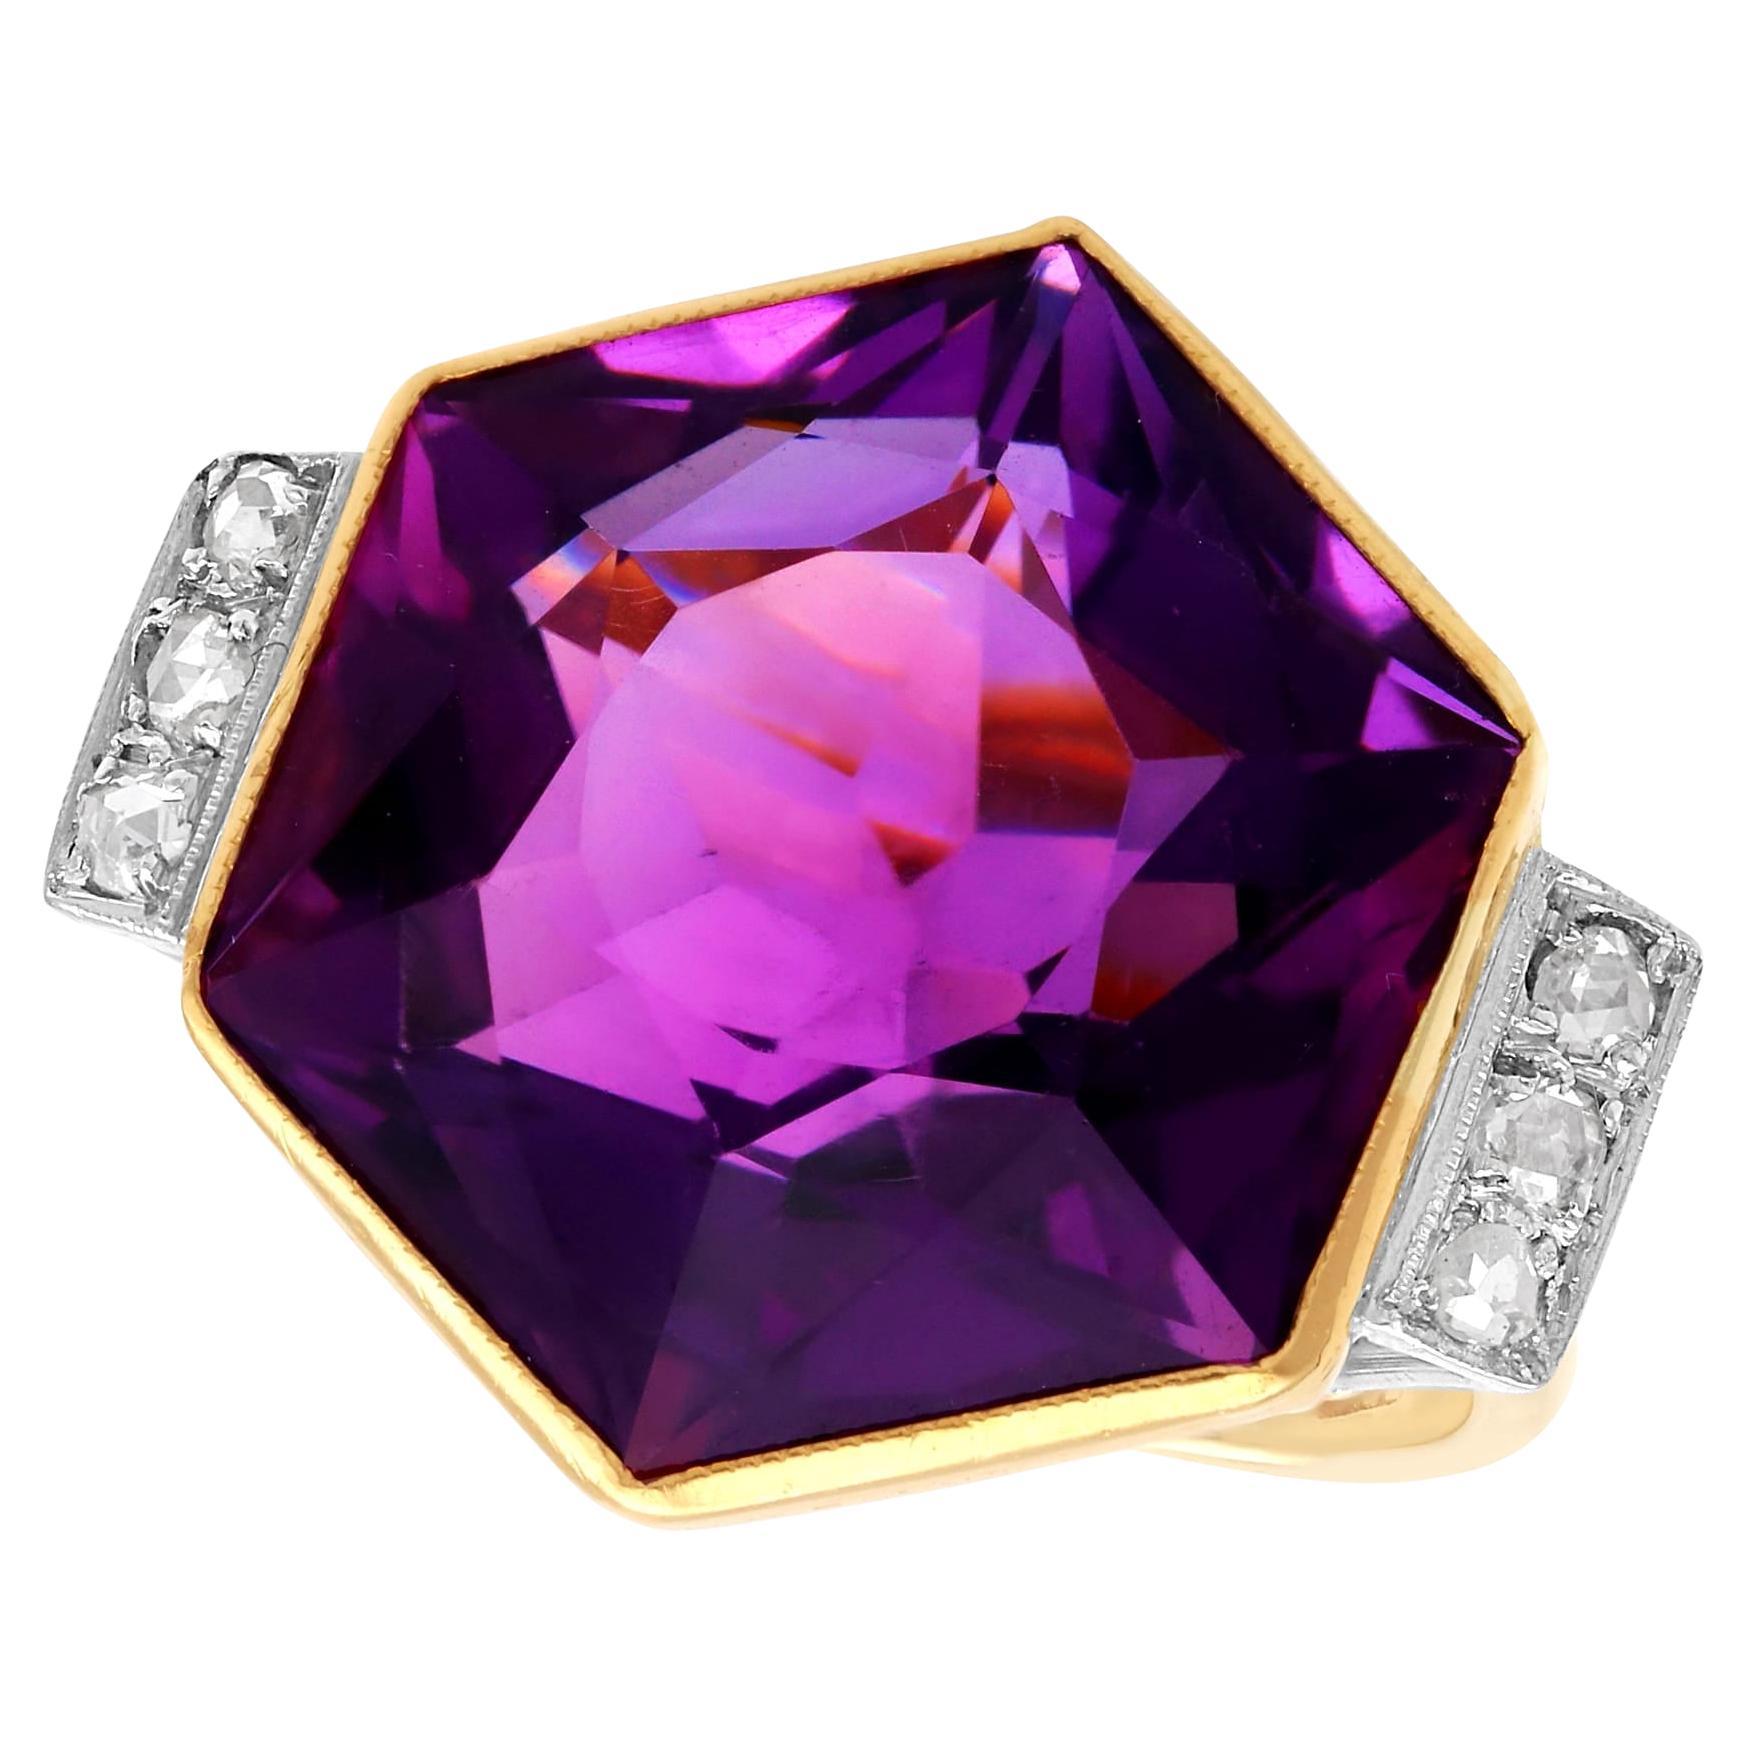 Vintage 1950s 19.84ct Amethyst and 0.24ct Diamond, 9k Yellow Gold Dress Ring